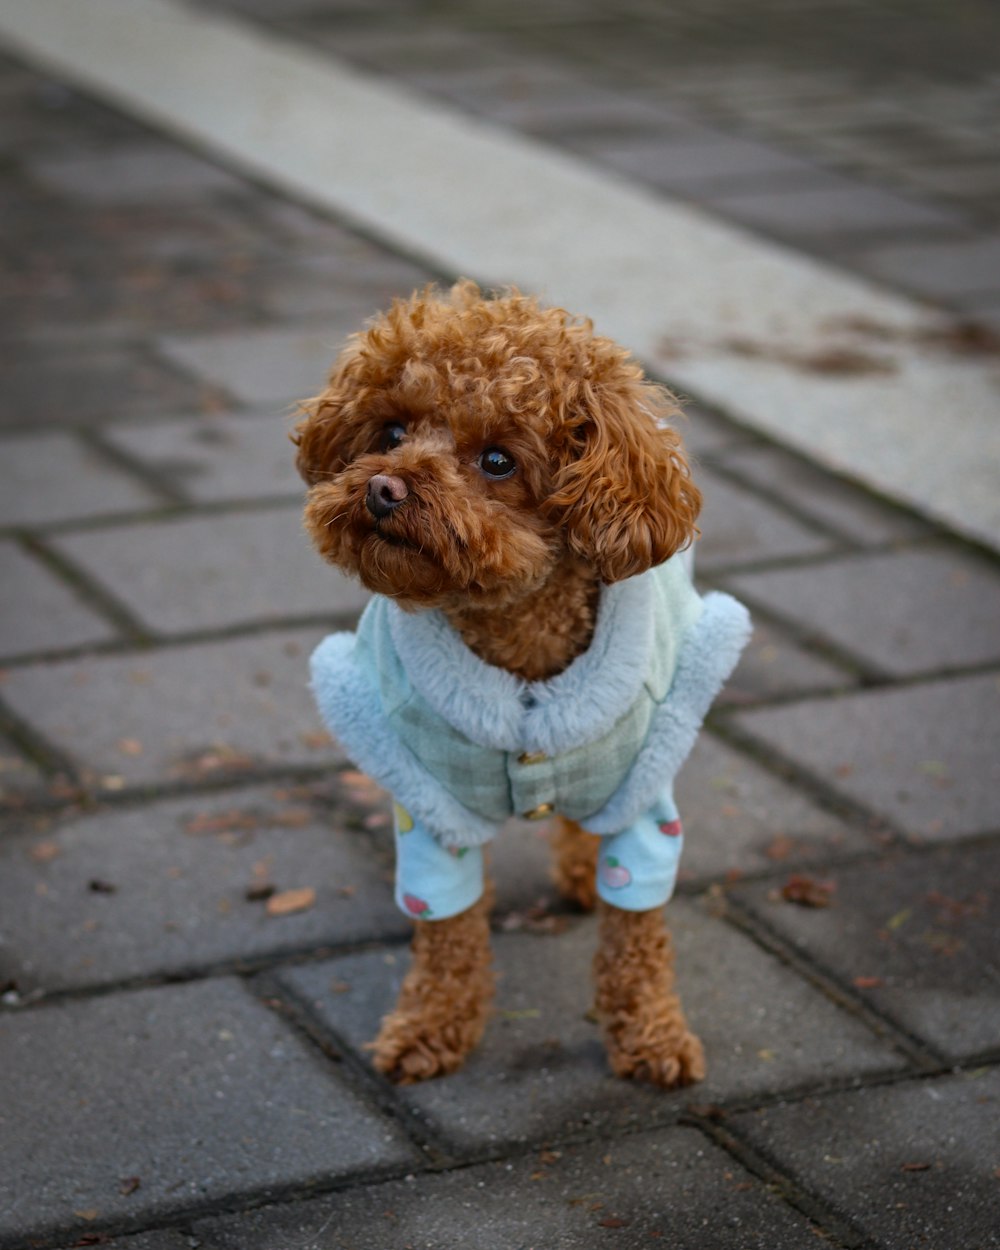 a small brown dog wearing a blue sweater